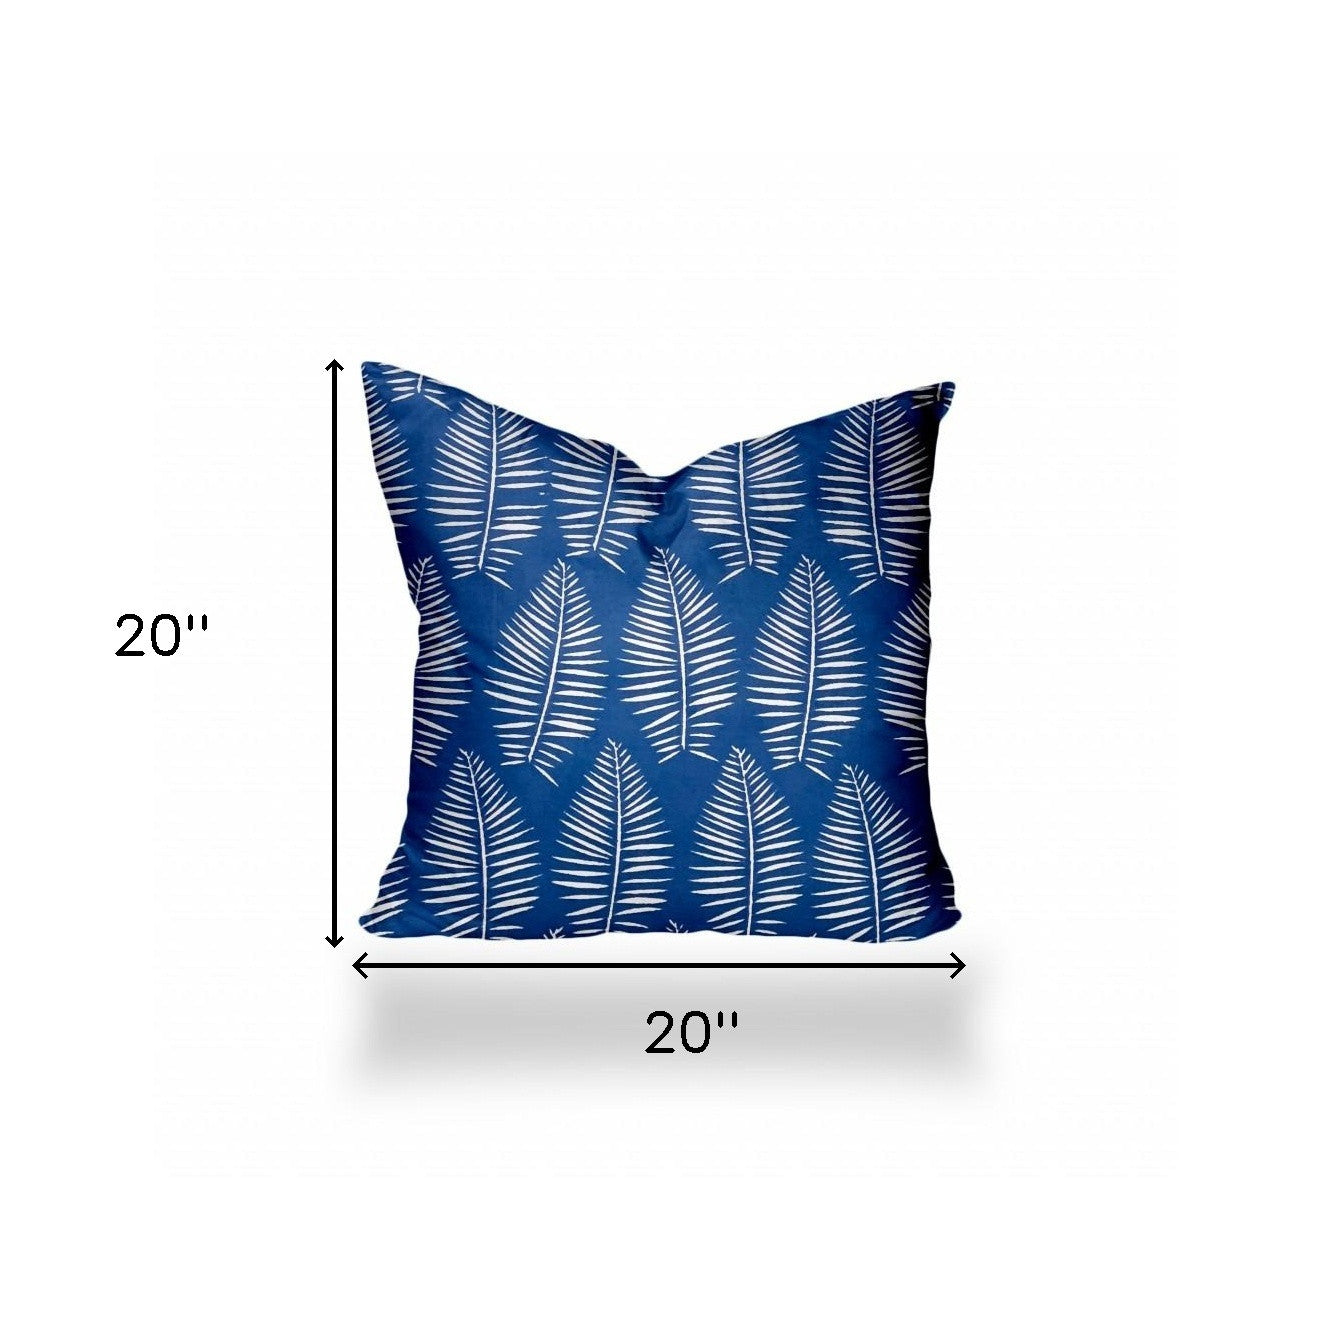 20" X 20" Blue And White Zippered Tropical Throw Indoor Outdoor Pillow Cover